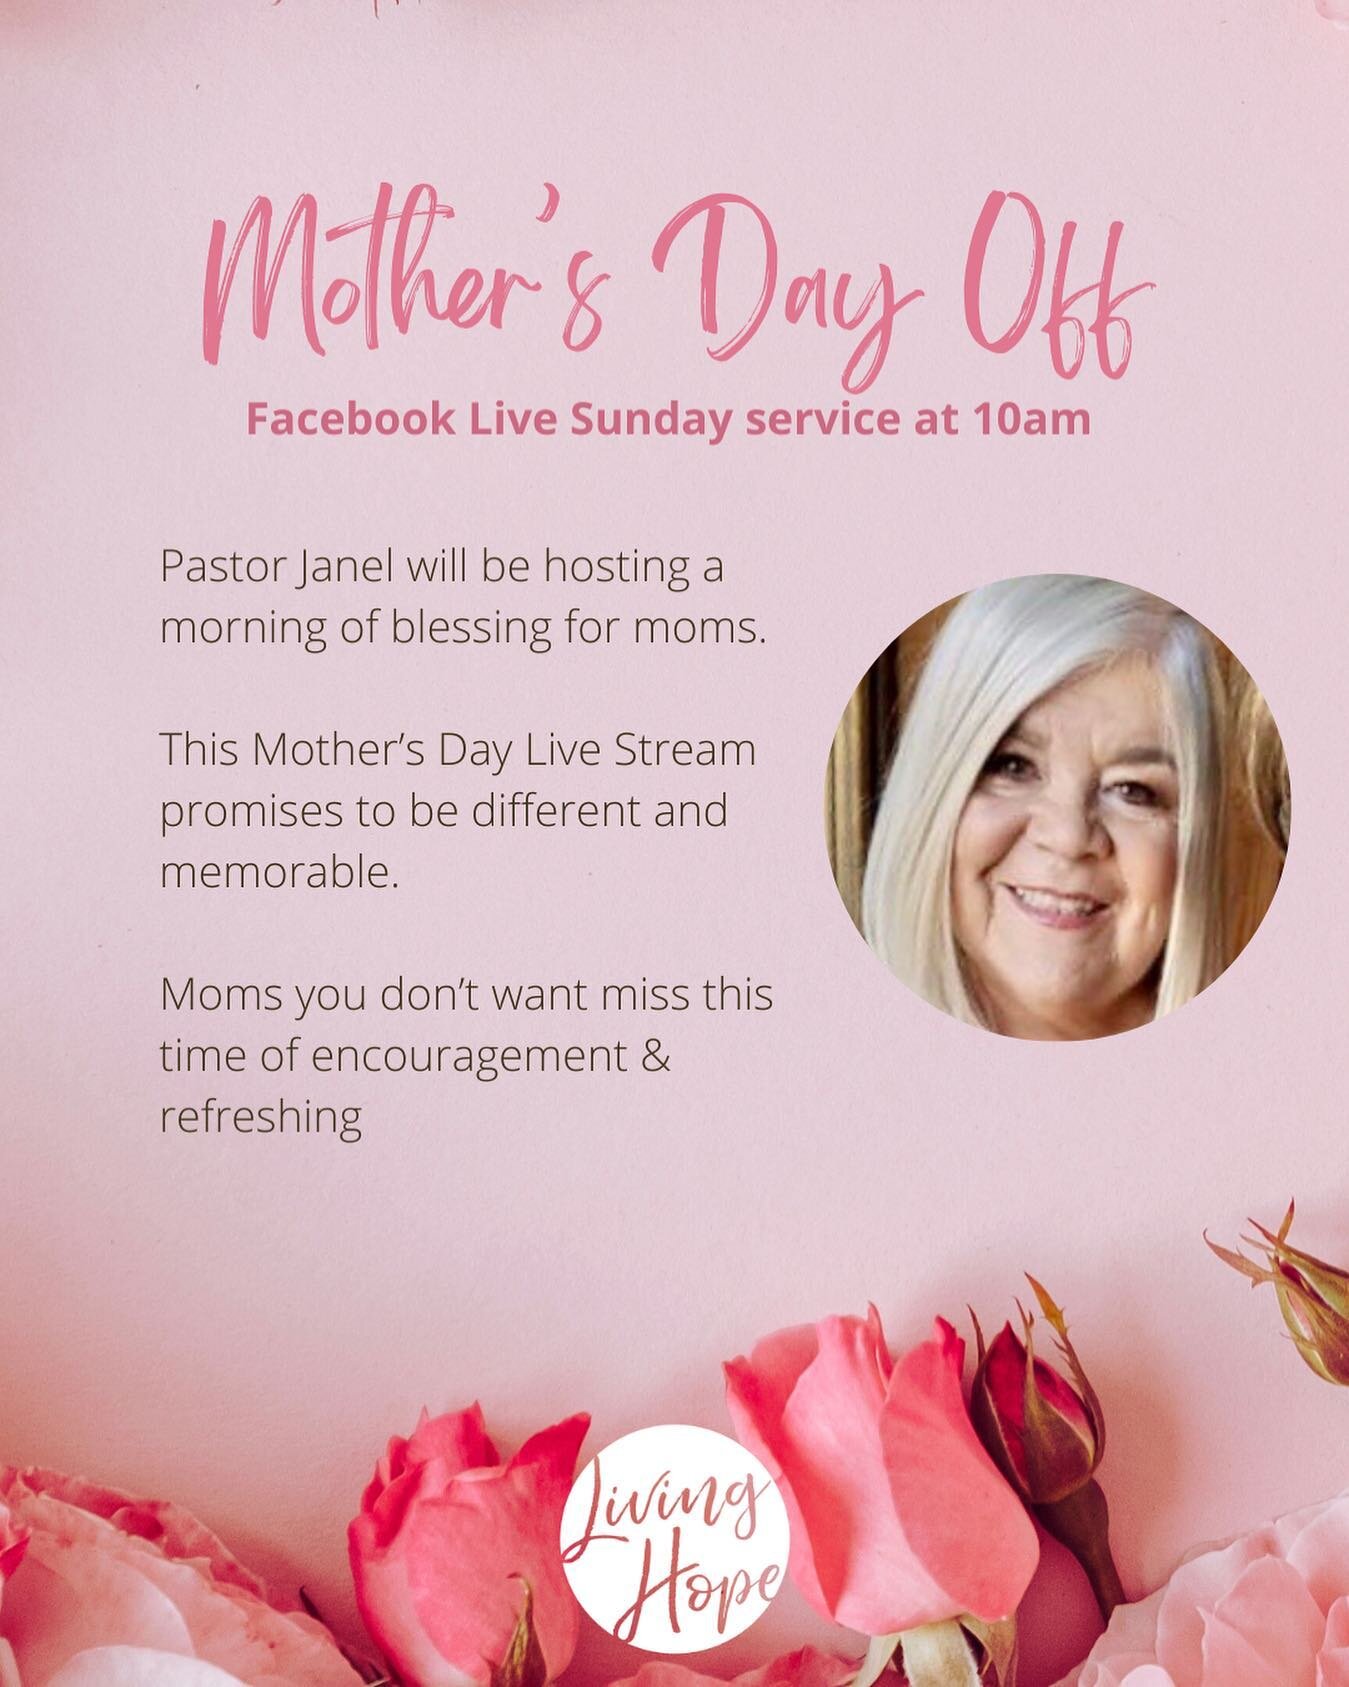 We&rsquo;re giving Mothers the day off this Sunday! Join us online via Facebook Live at 10am for a special Mother&rsquo;s Day service. 

Enjoy breakfast from the comfort of your home while Pastor Janel shares a special message!